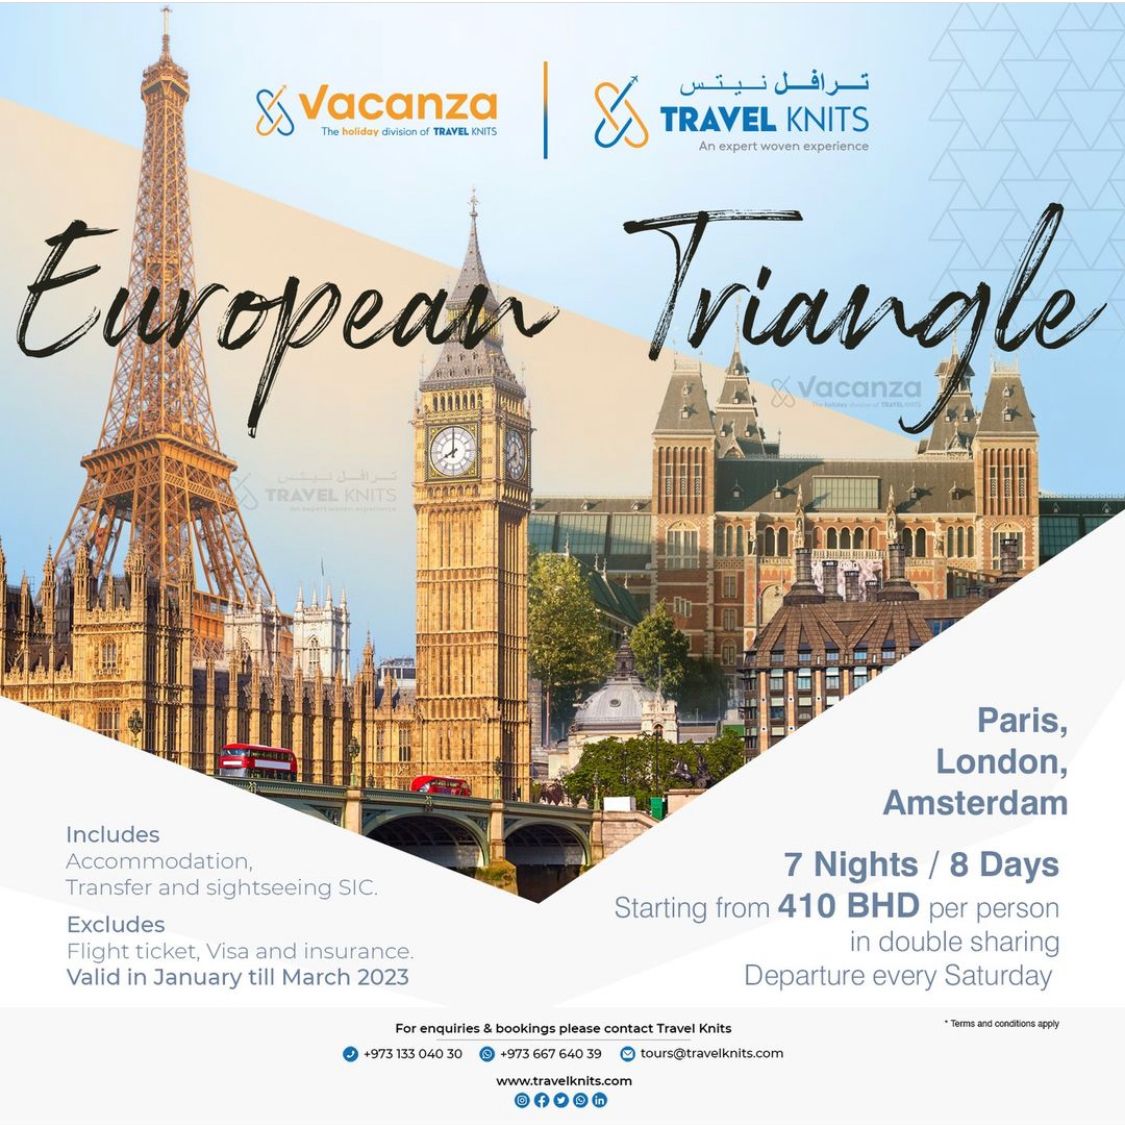 European triangleTour Packages - Book honeymoon ,family,adventure tour packages to European triangle|Travel Knits